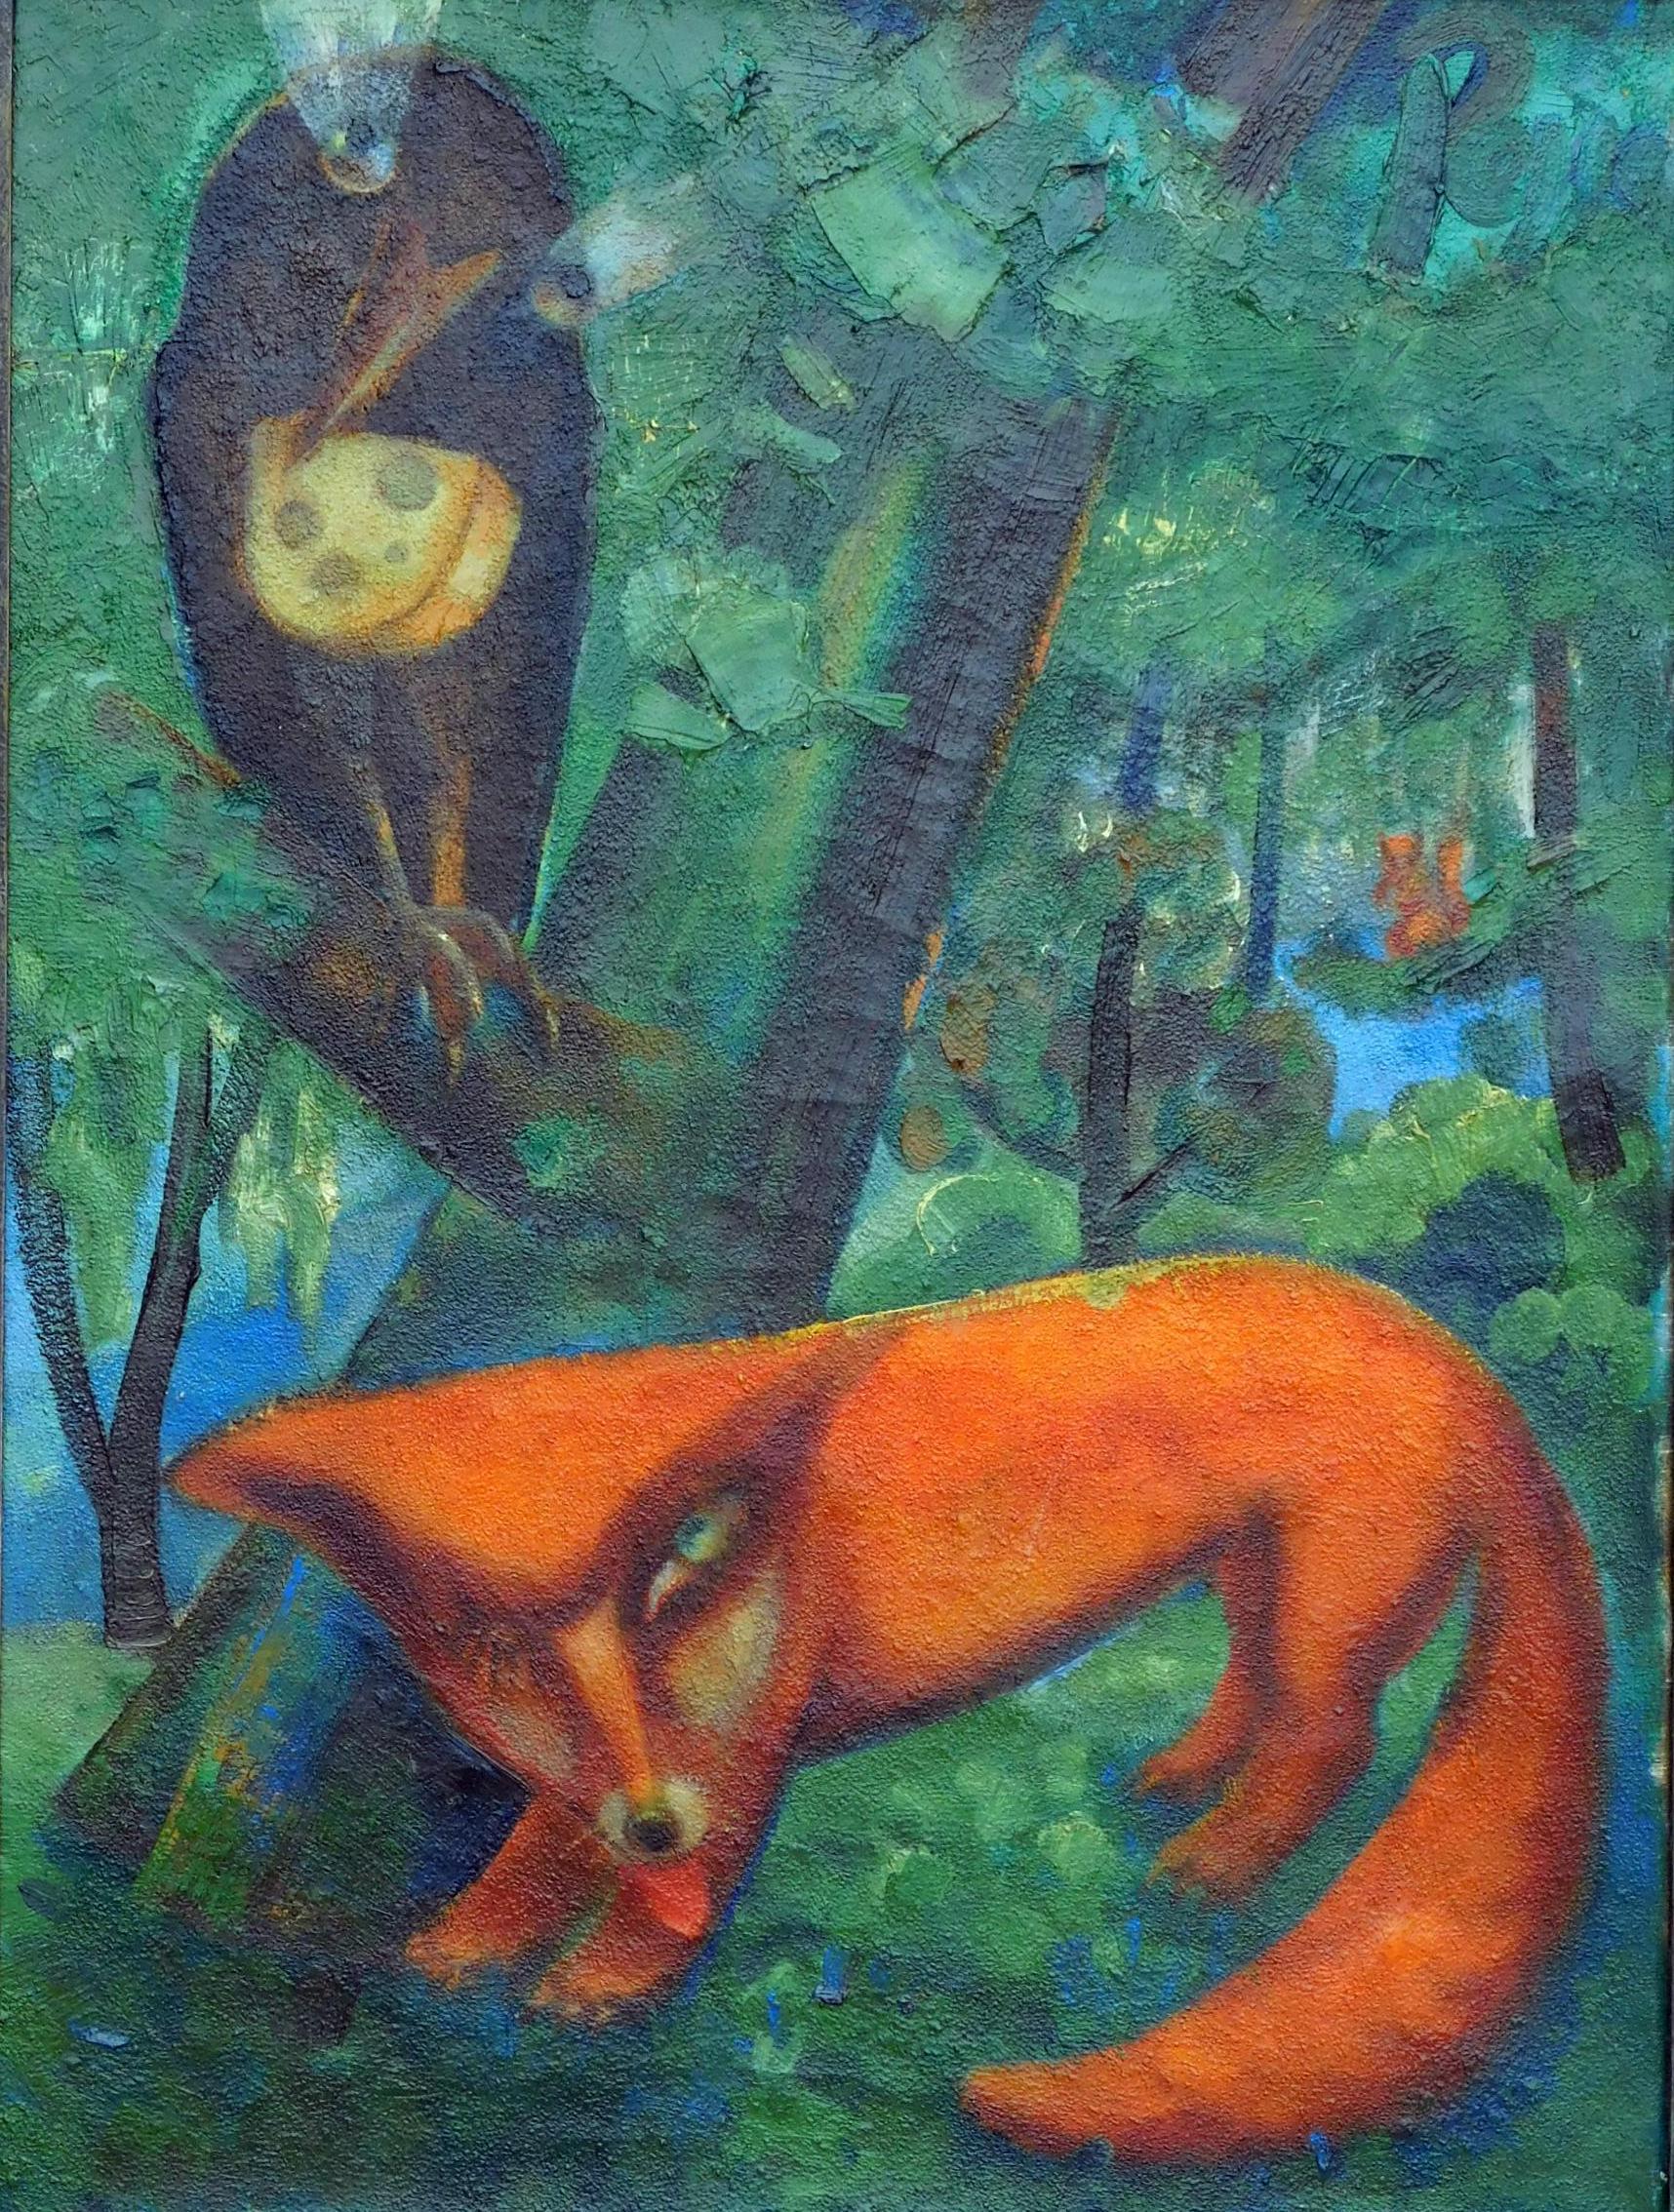 Wonderful fairytale painting, oil on canvas - perfect for the child’s room.
By Slavic artist Vejecoslav Pejacevic, created circa 1930's - 1940's.
Depicts the well-loved Aesop Fable concerning flattery featuring the sly fox and the 
proud crow.